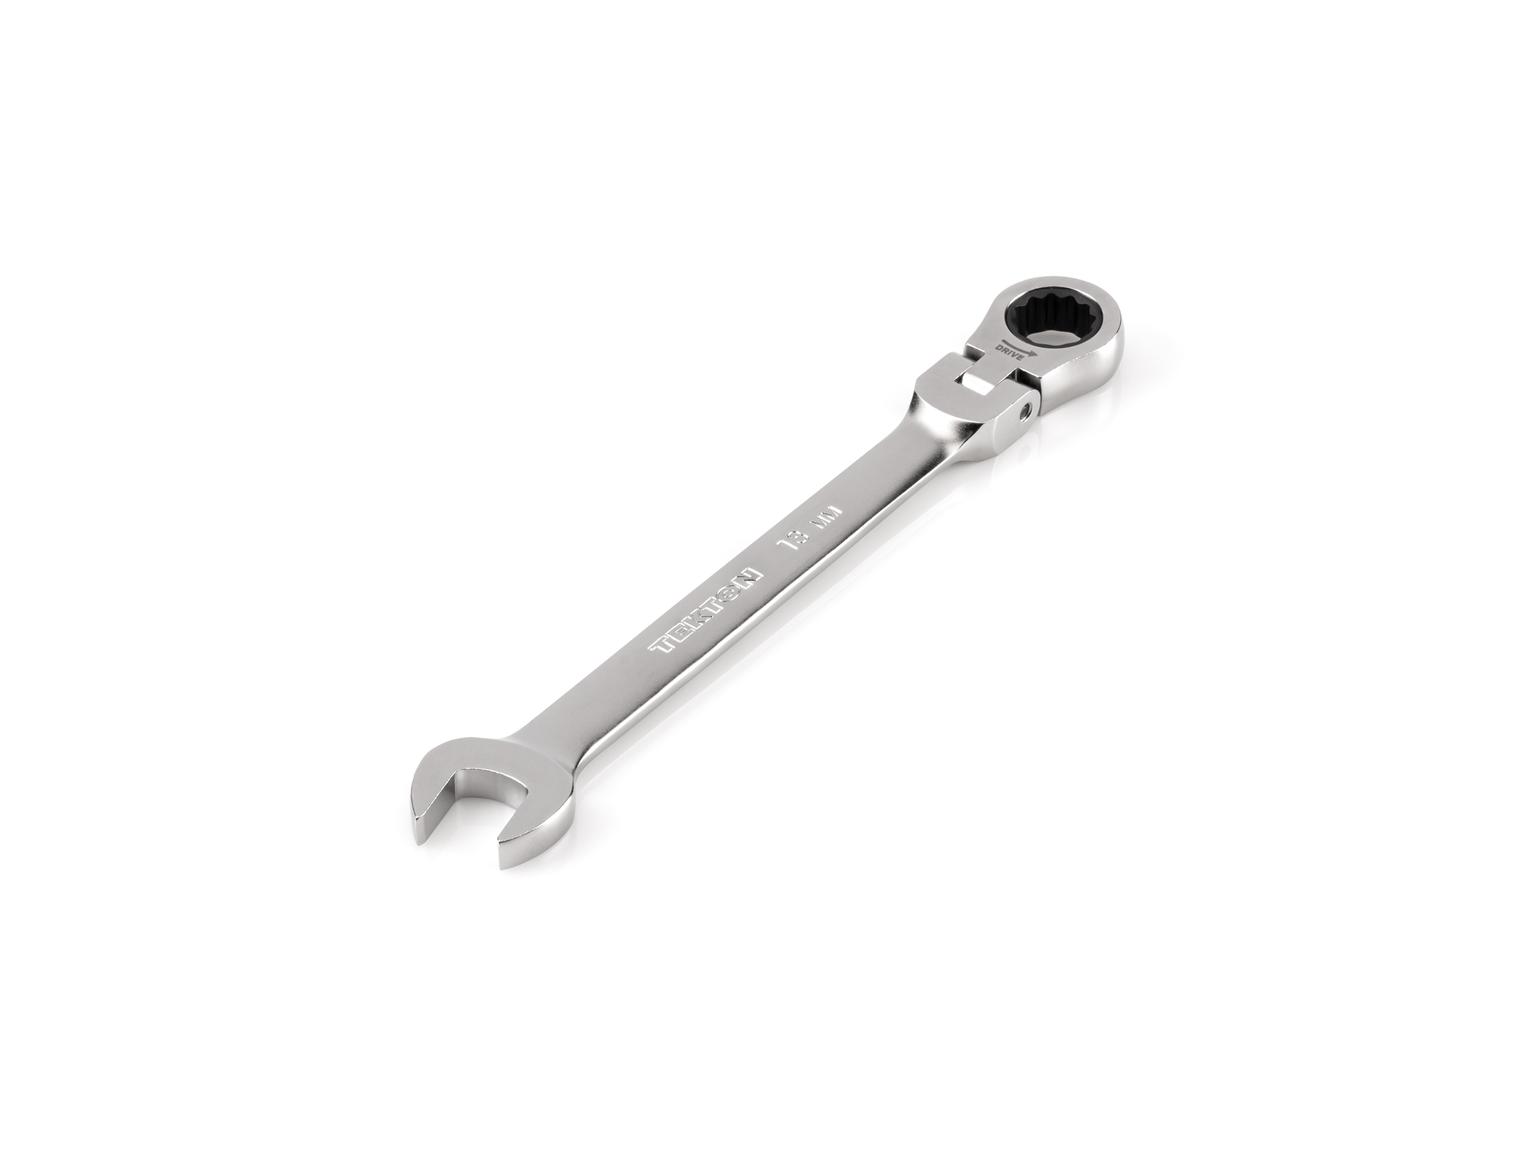 TEKTON WRC26413-T 13 mm Flex Head 12-Point Ratcheting Combination Wrench